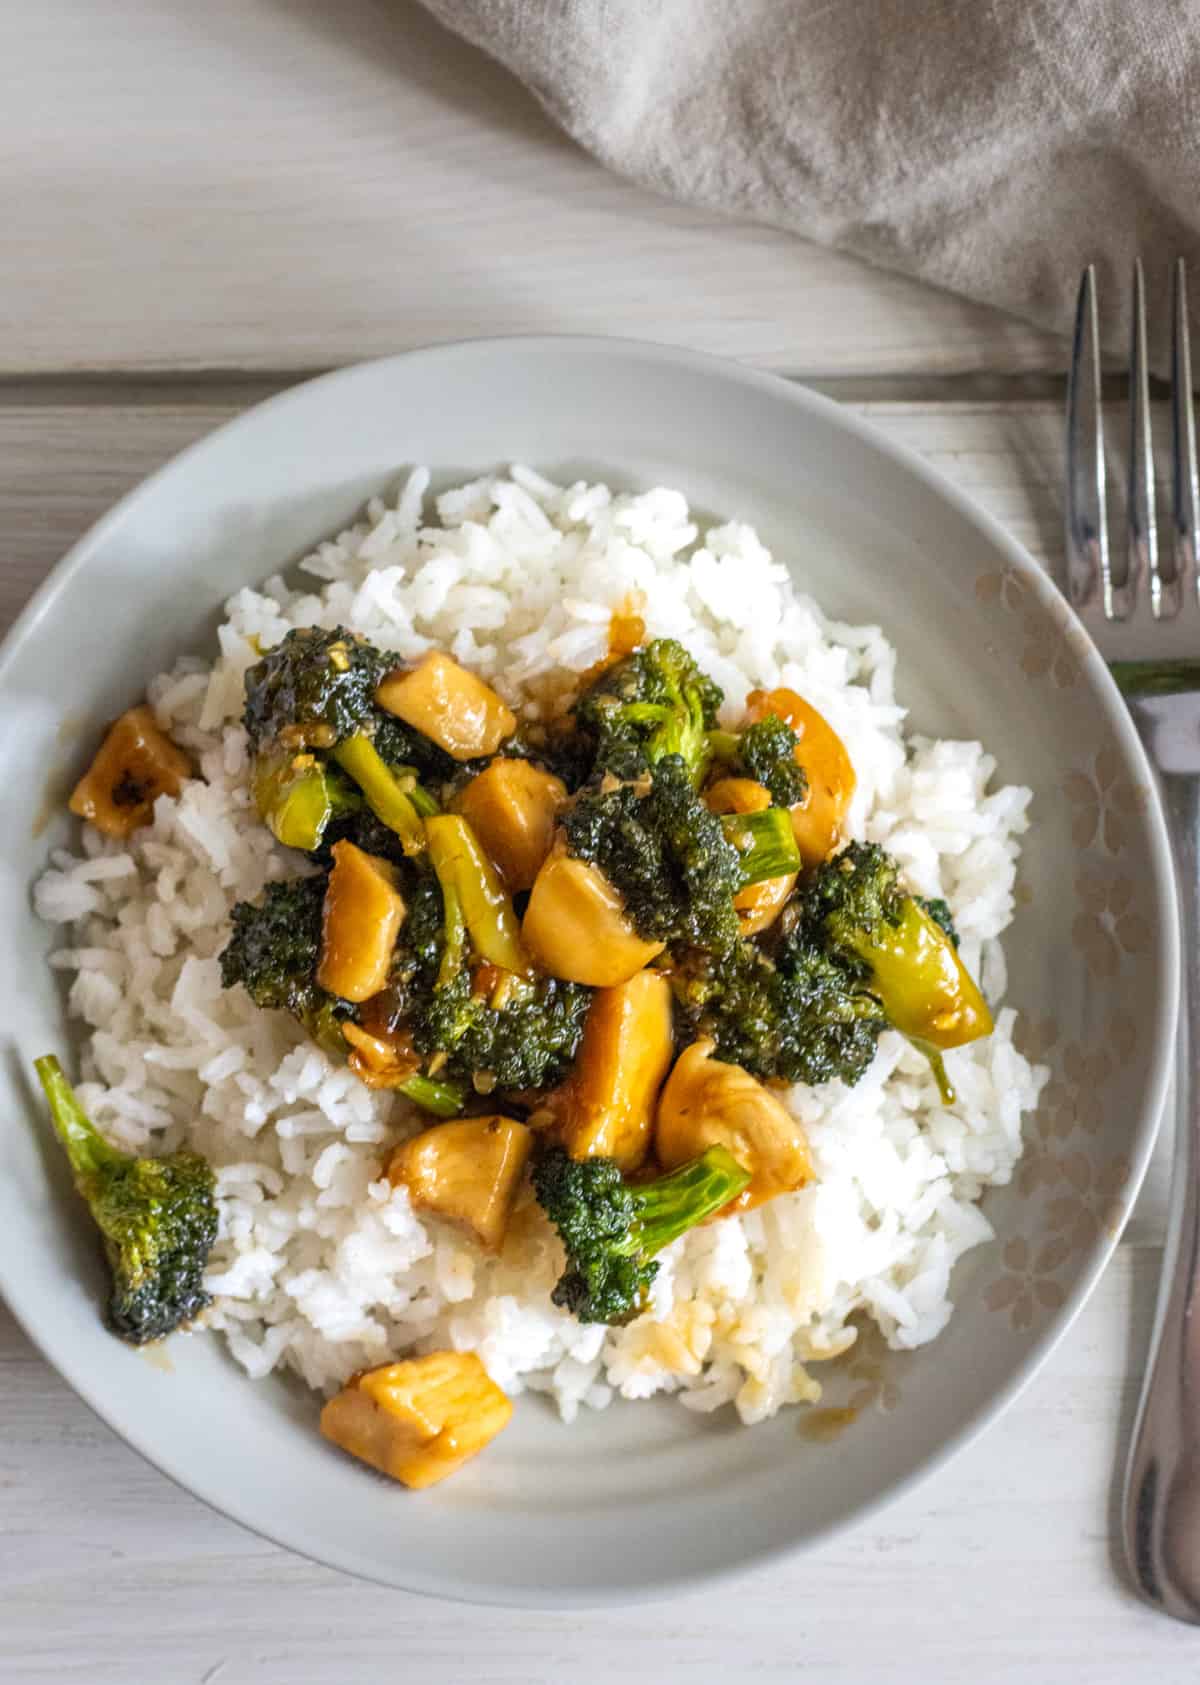 Plate of rice topped with honey garlic chicken stir fry with broccoli florets.